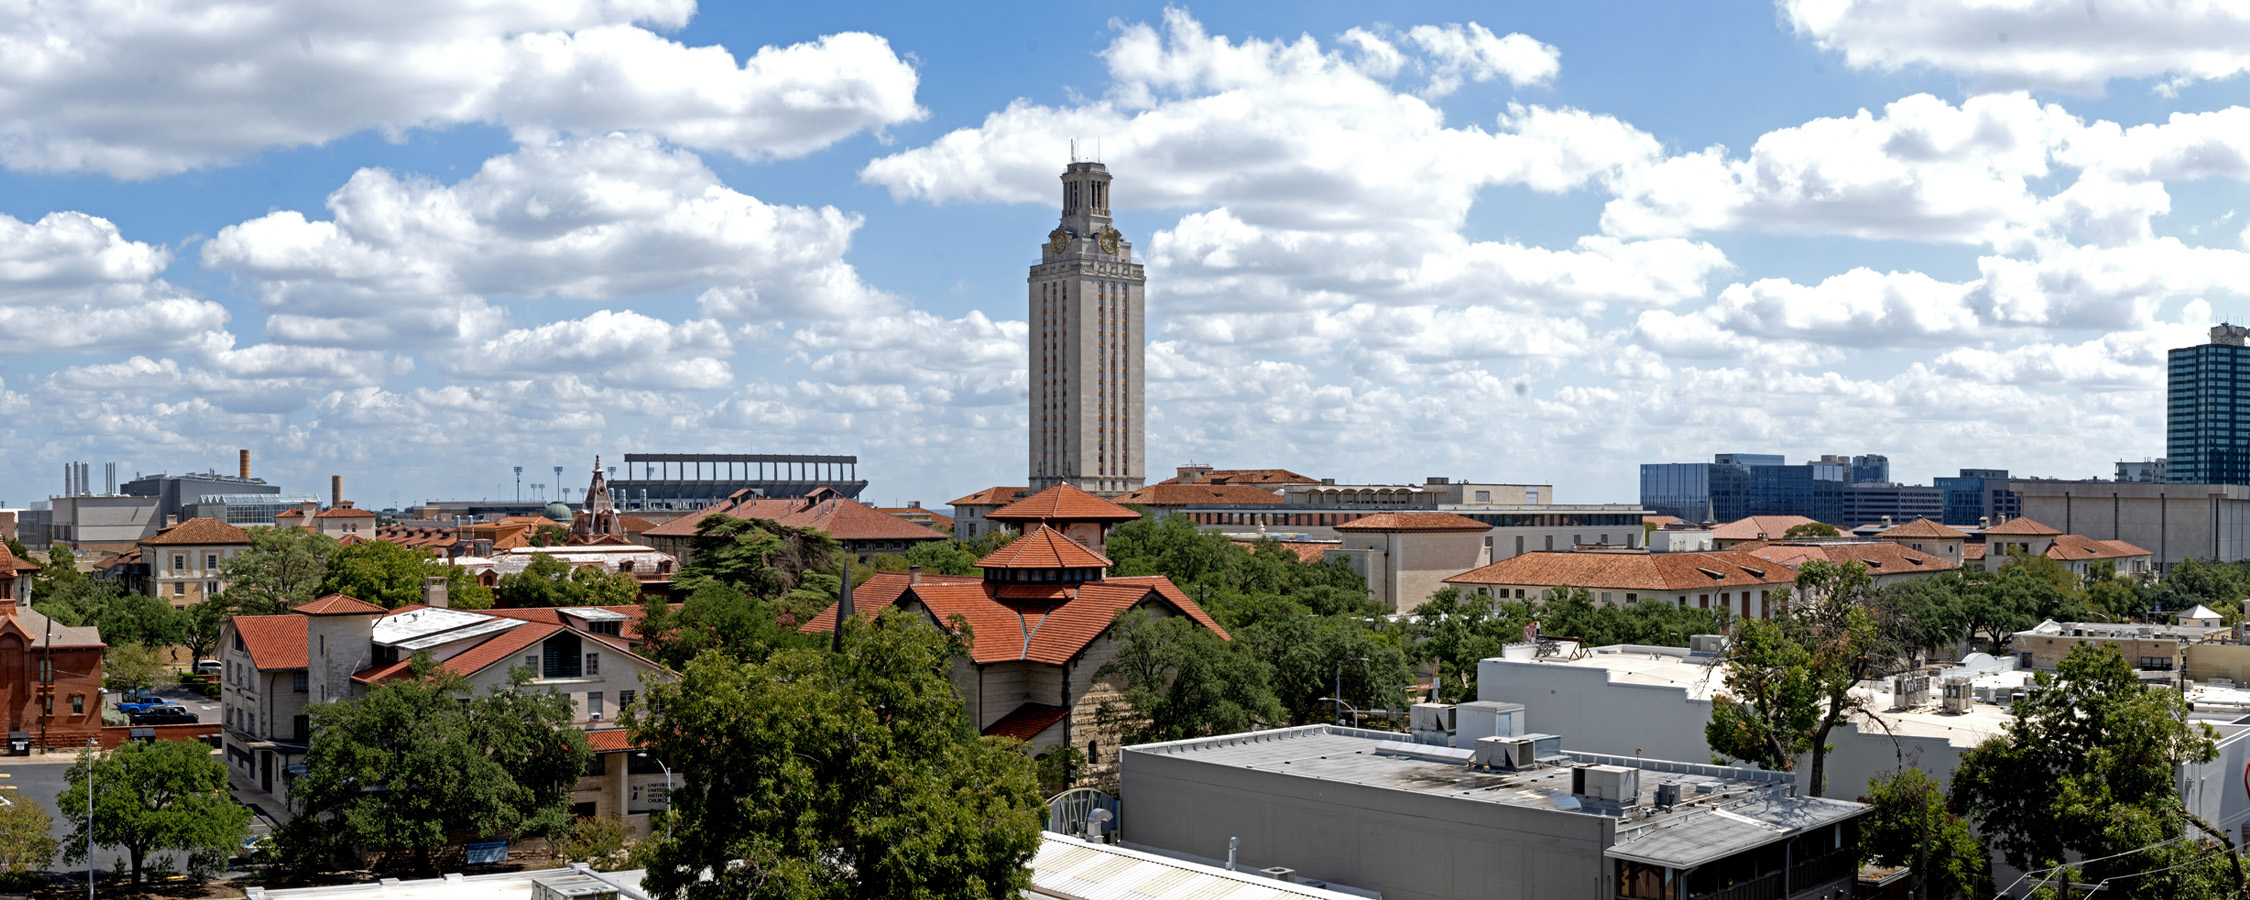 View of the UT Tower and UT Austin campus from San Antonio Garage